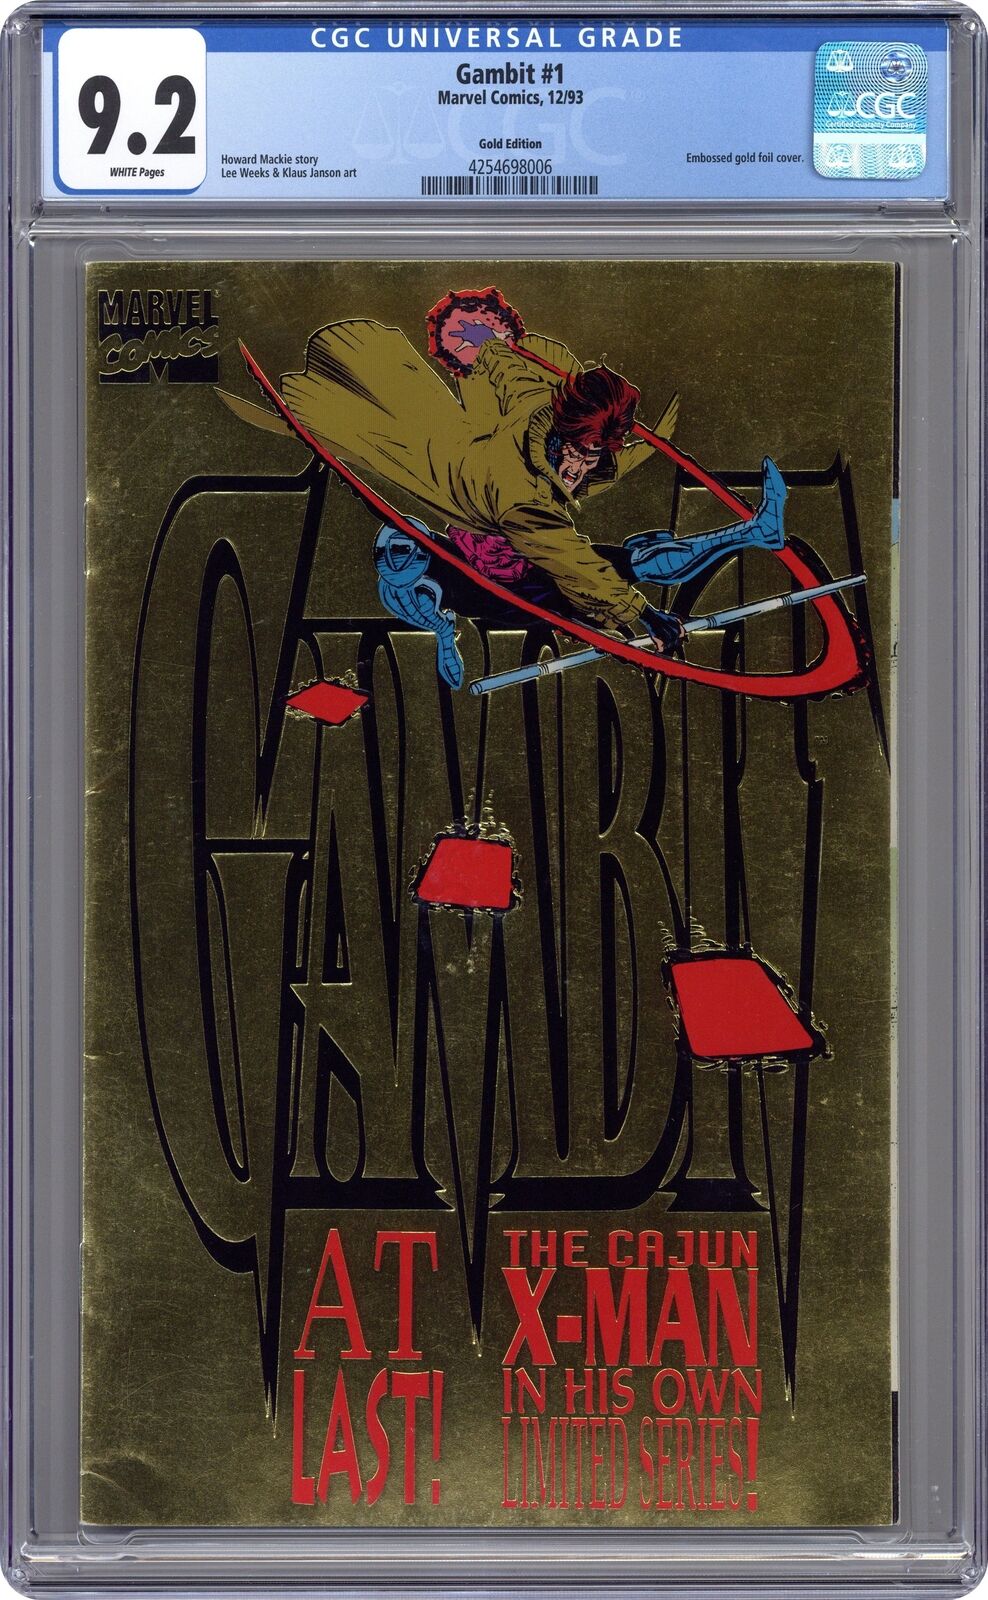 Gambit #1 Gold on Gold Variant CGC 9.2 1993 4254698006